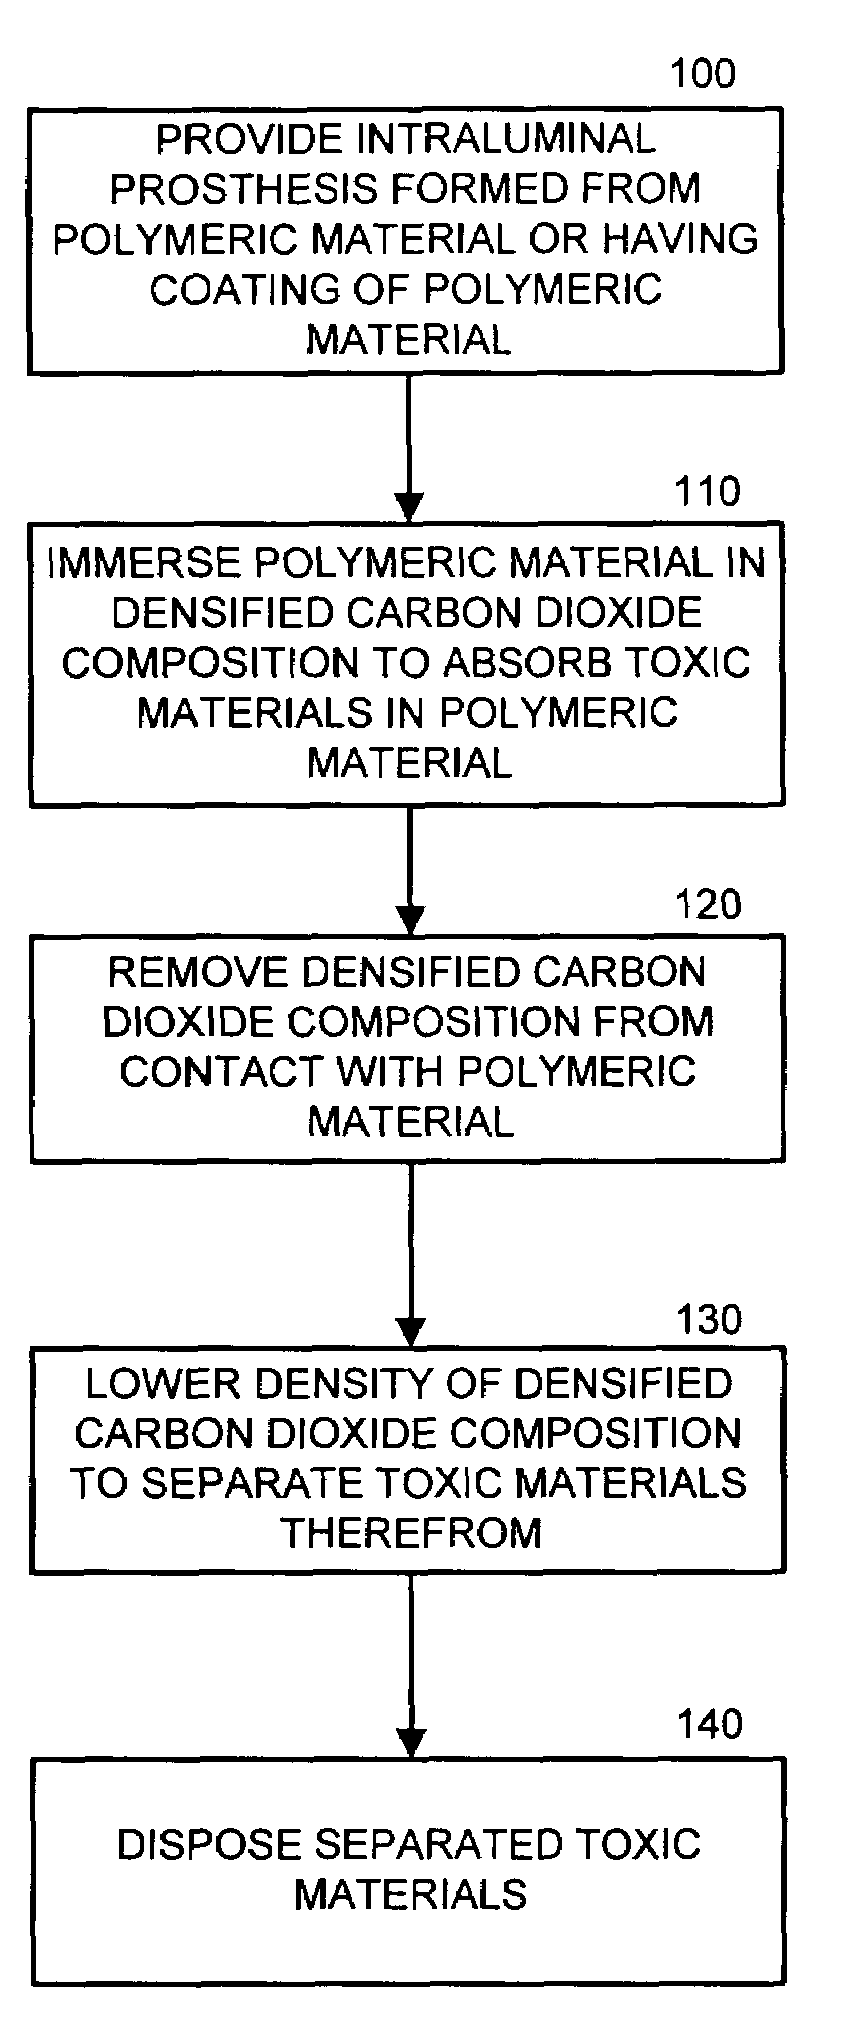 Carbon dioxide-assisted methods of providing biocompatible intraluminal prostheses